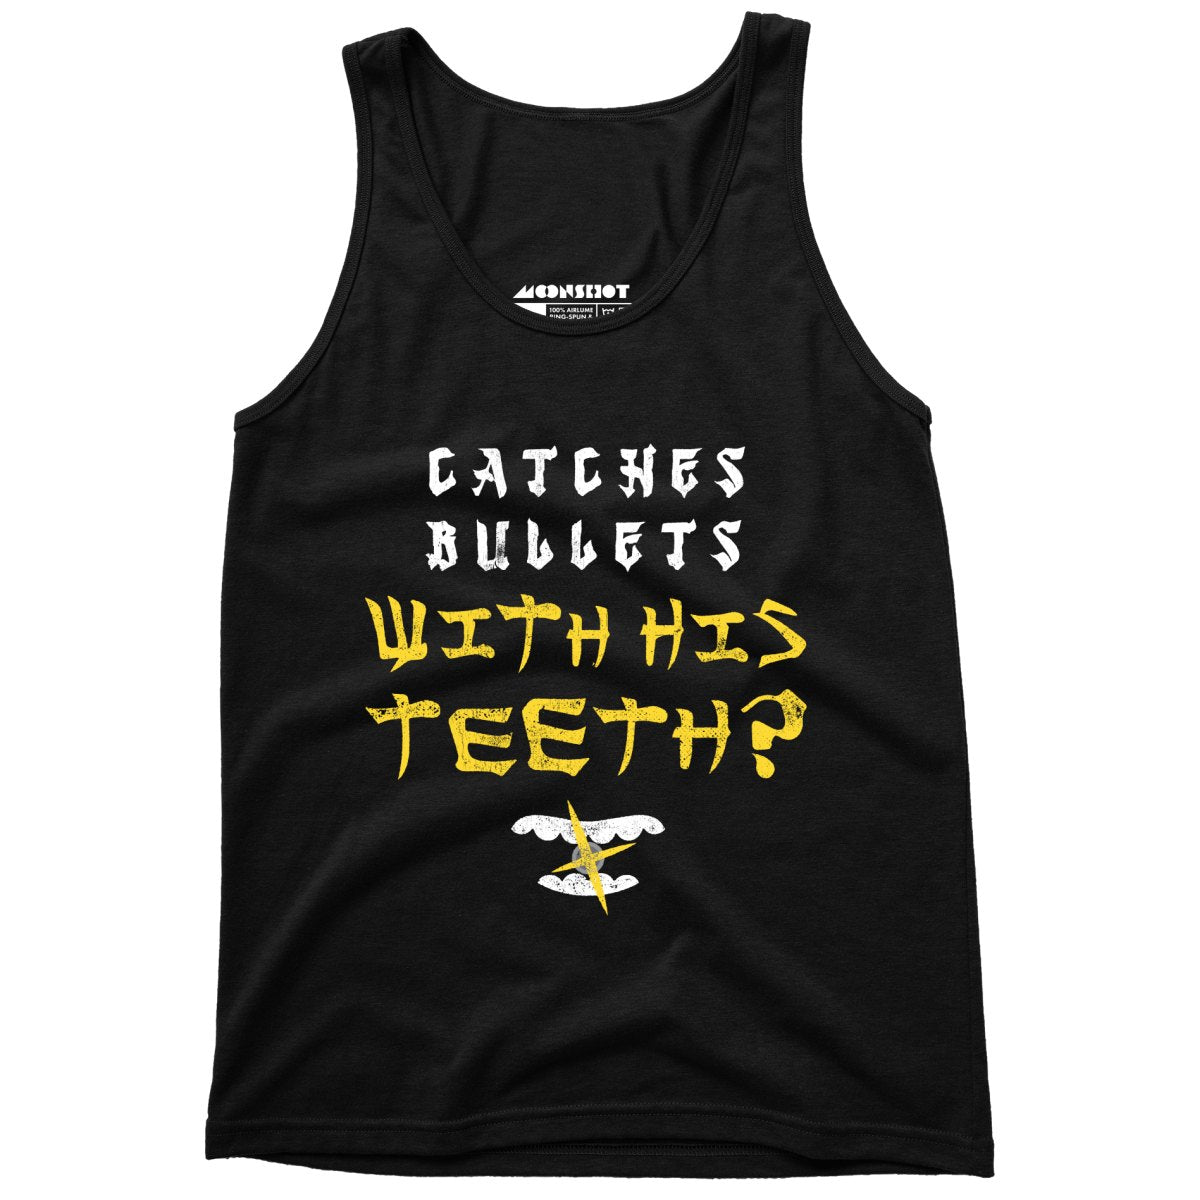 Last Dragon - Catches Bullets With His Teeth? - Unisex Tank Top